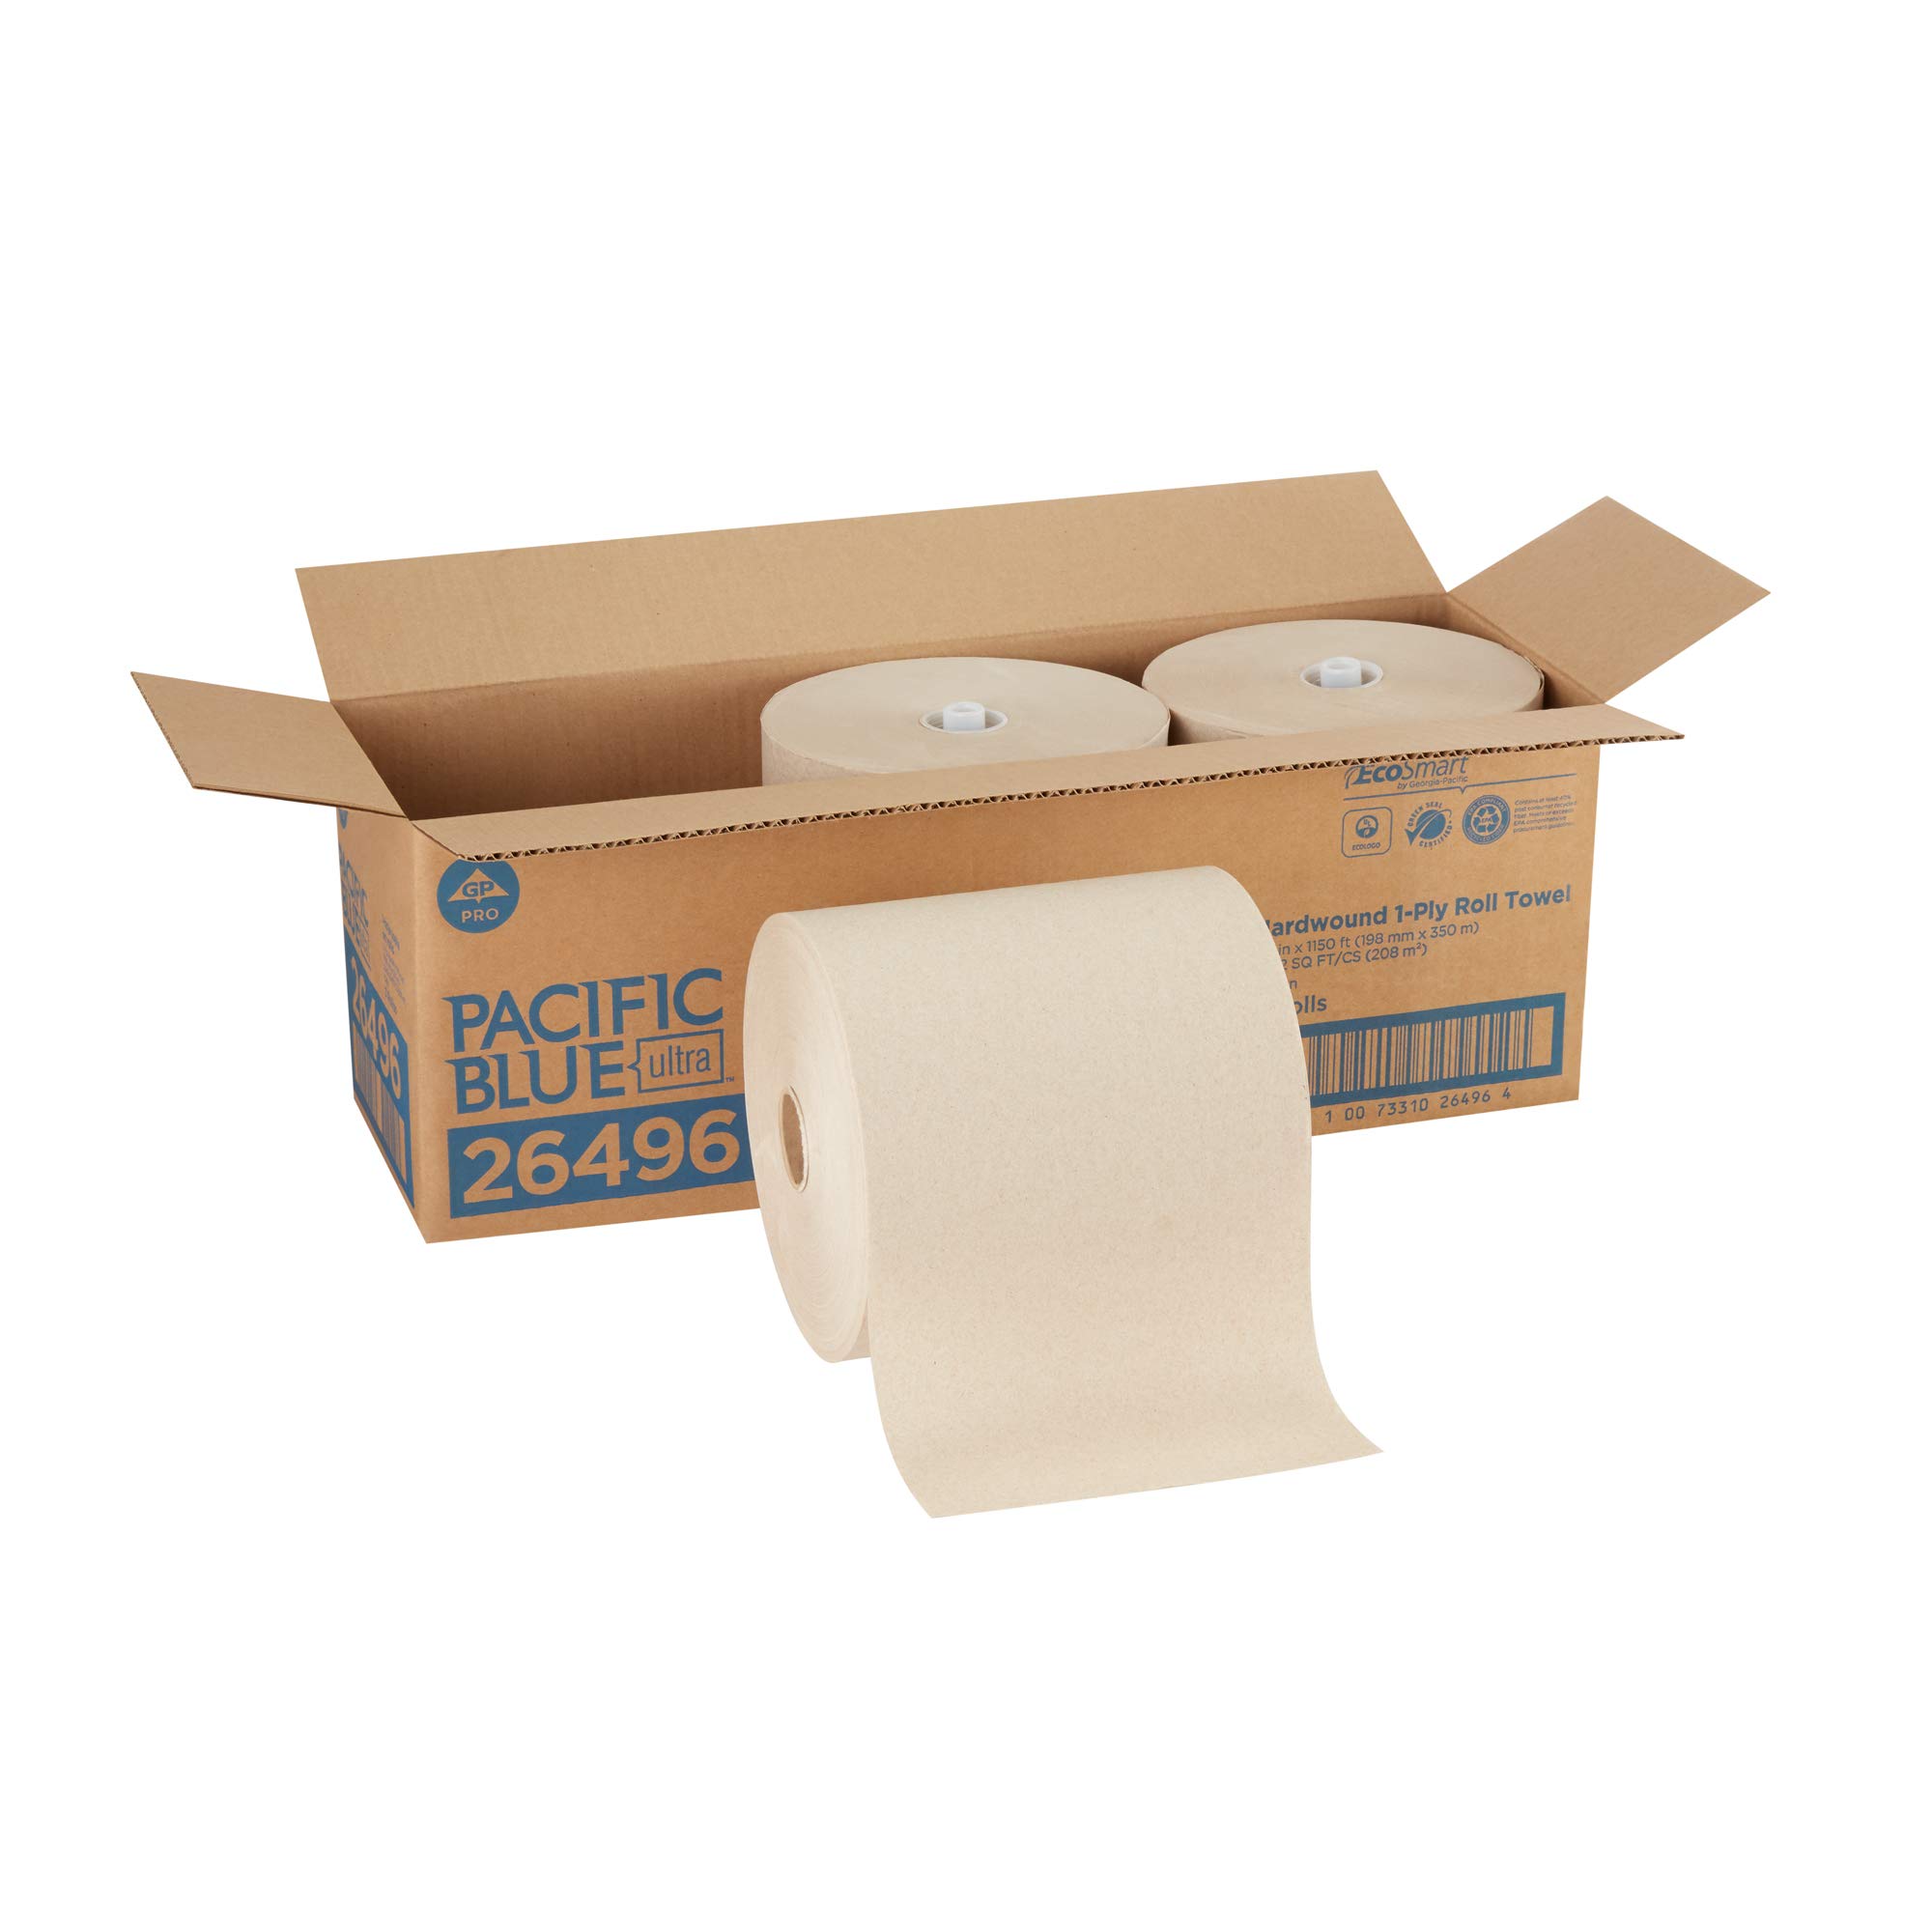 Georgia-Pacific Pacific Blue Ultra High-Capacity Recycled Paper Towel Roll by GP PRO ()